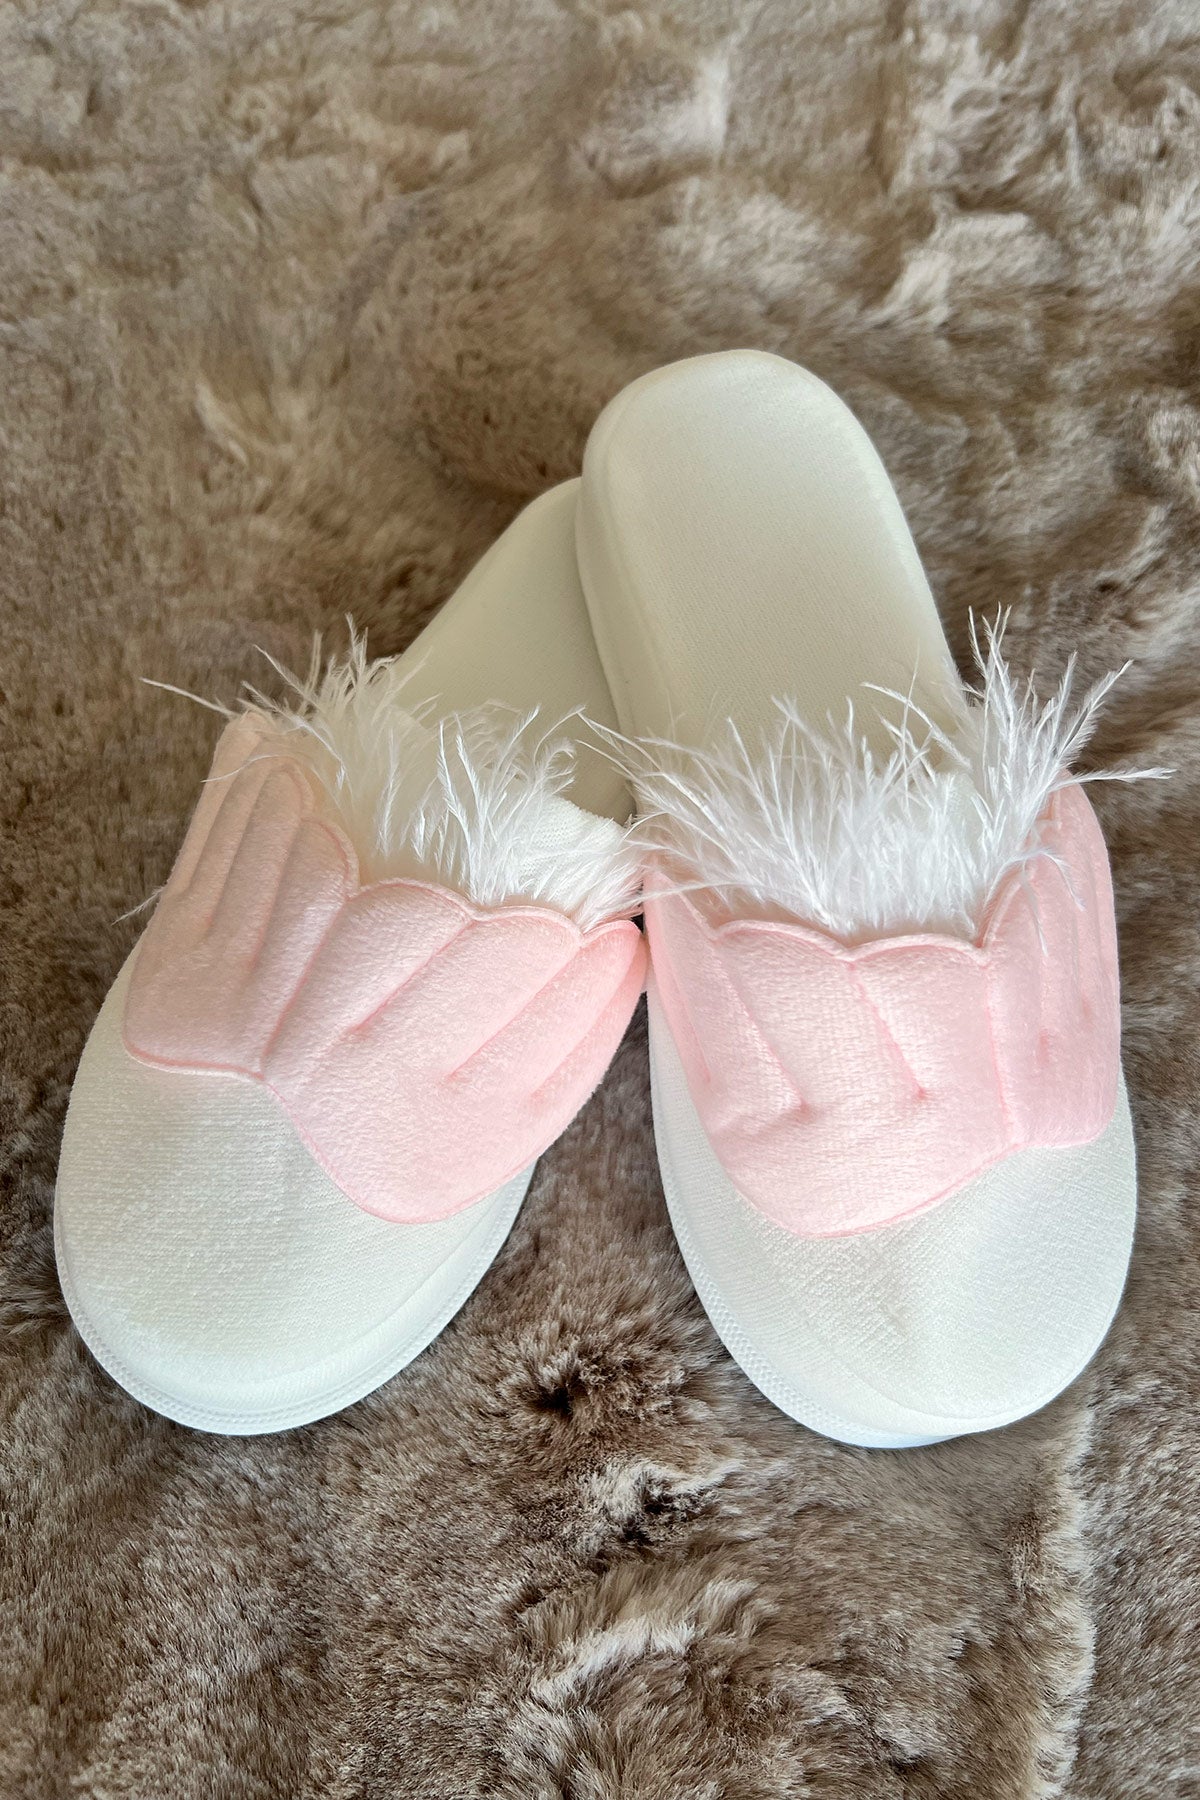 Shopymommy 75007 Angel Wing Maternity Slippers Pink